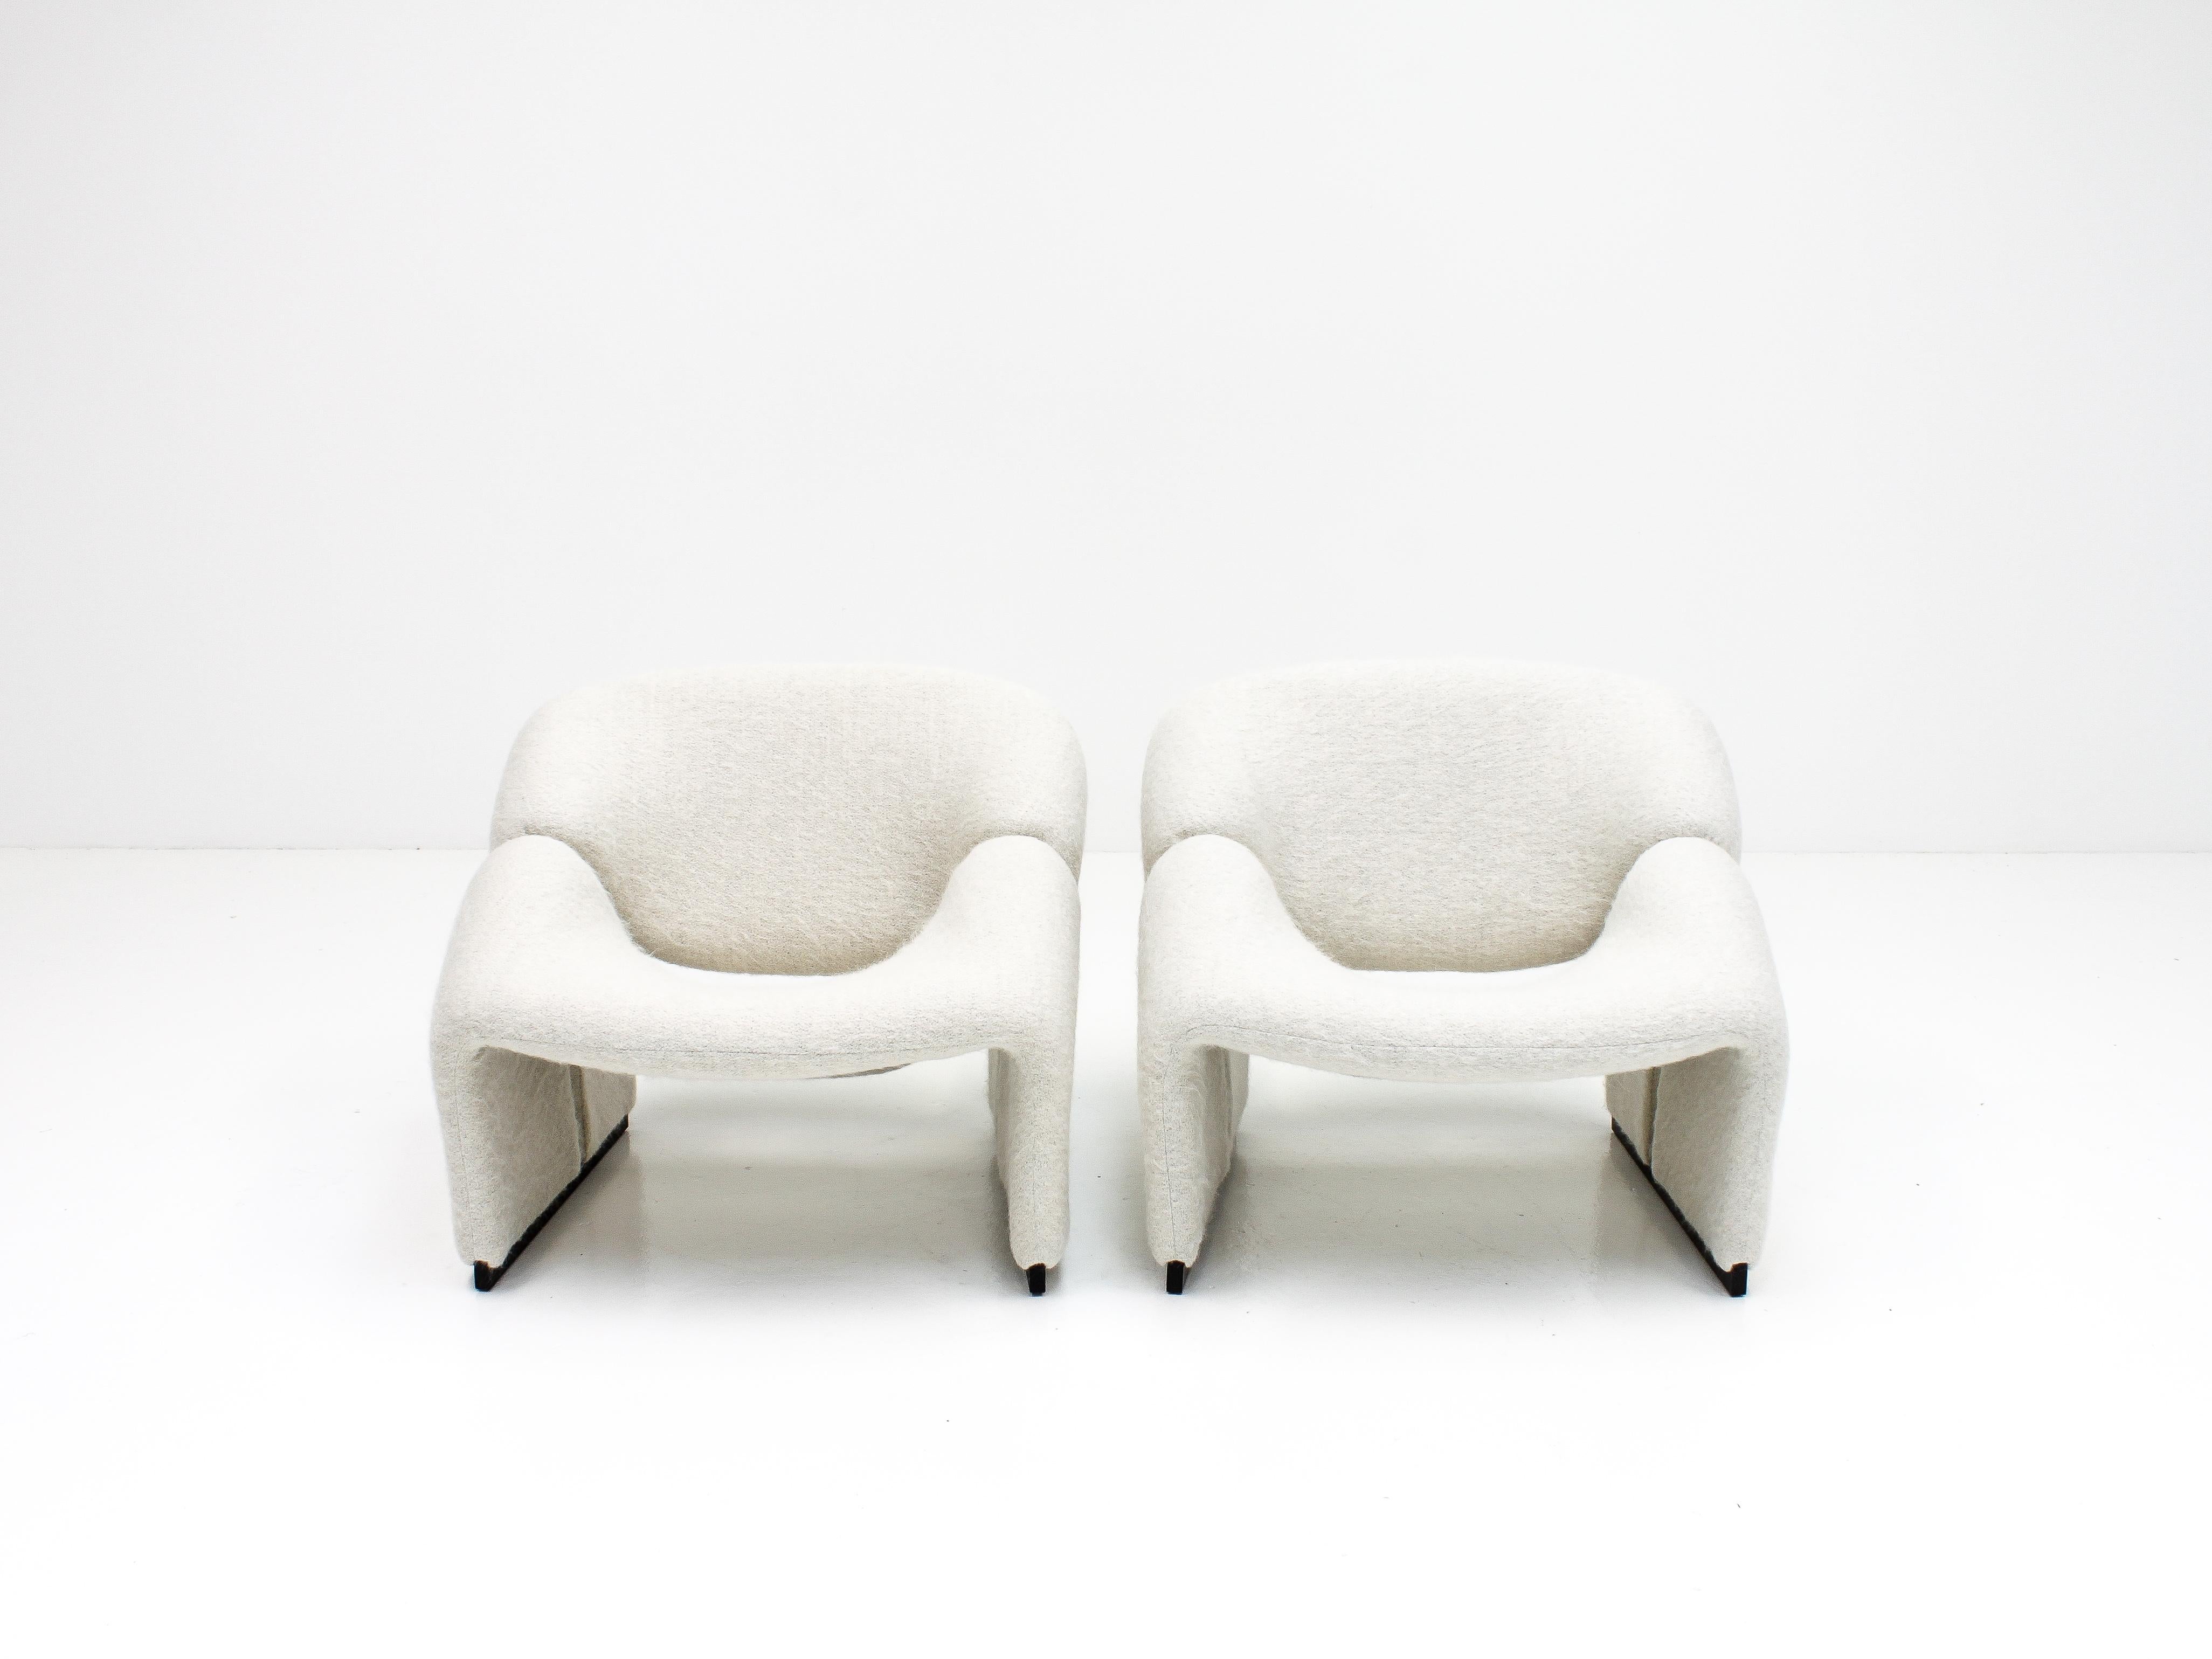 Pair of Pierre Paulin F580 1st Edition Groovy Chairs in Pierre Frey for Artifort 1